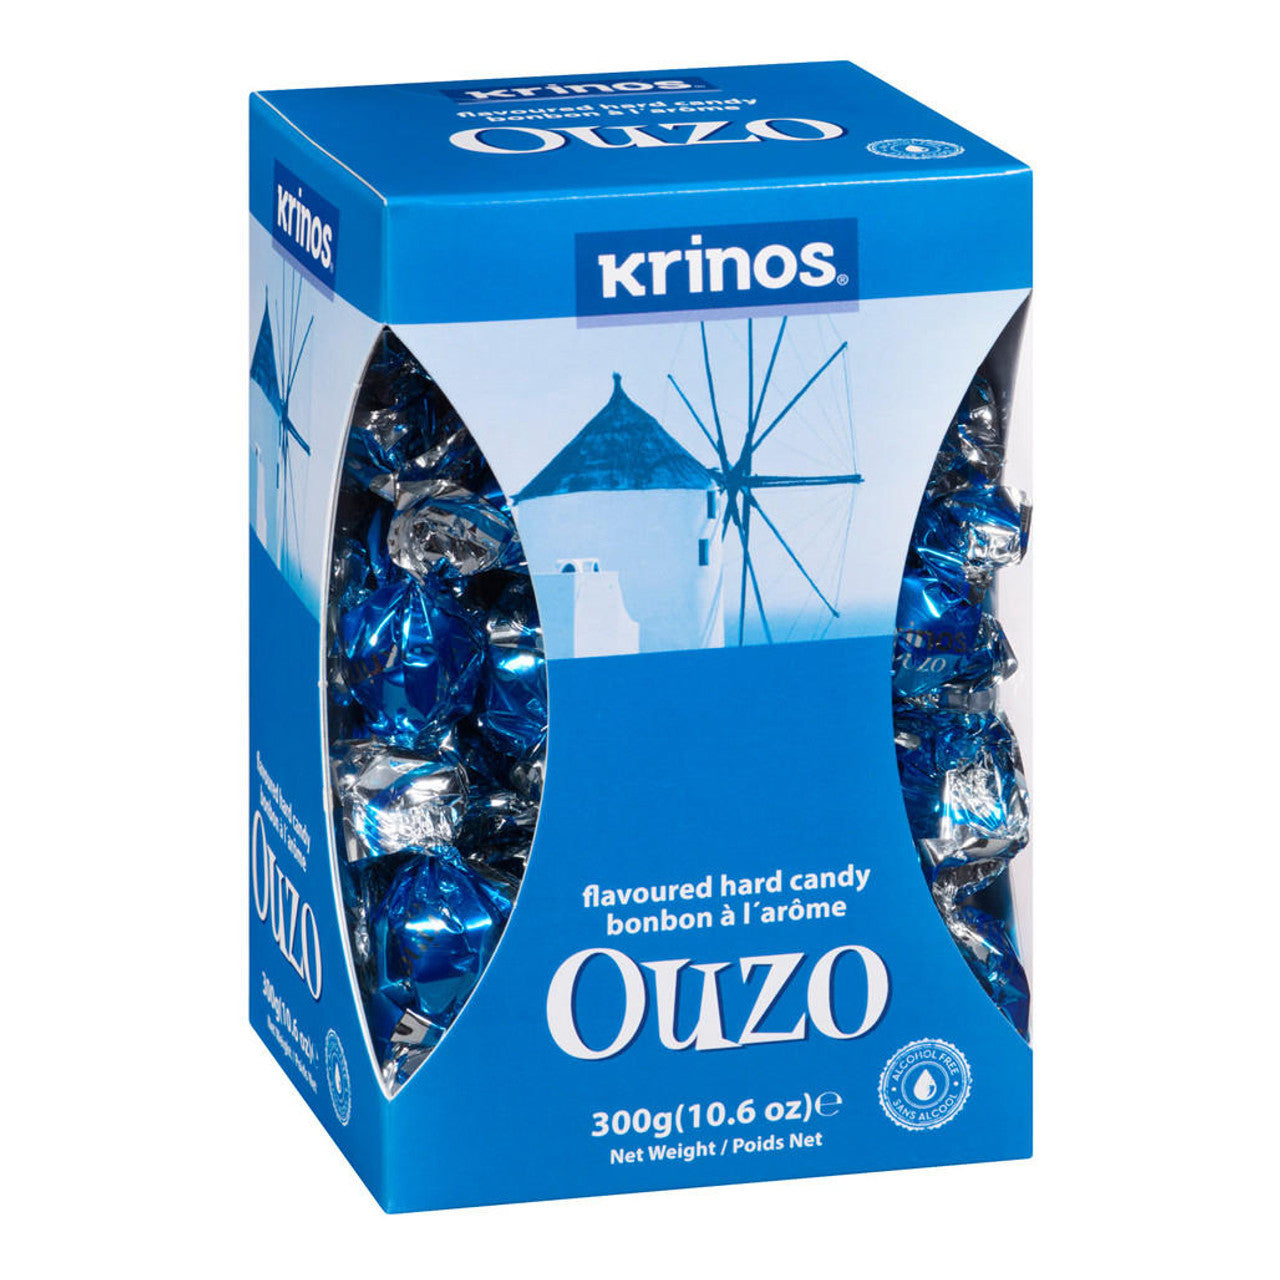 Krinos Ouzo flavoured hard candy 300g